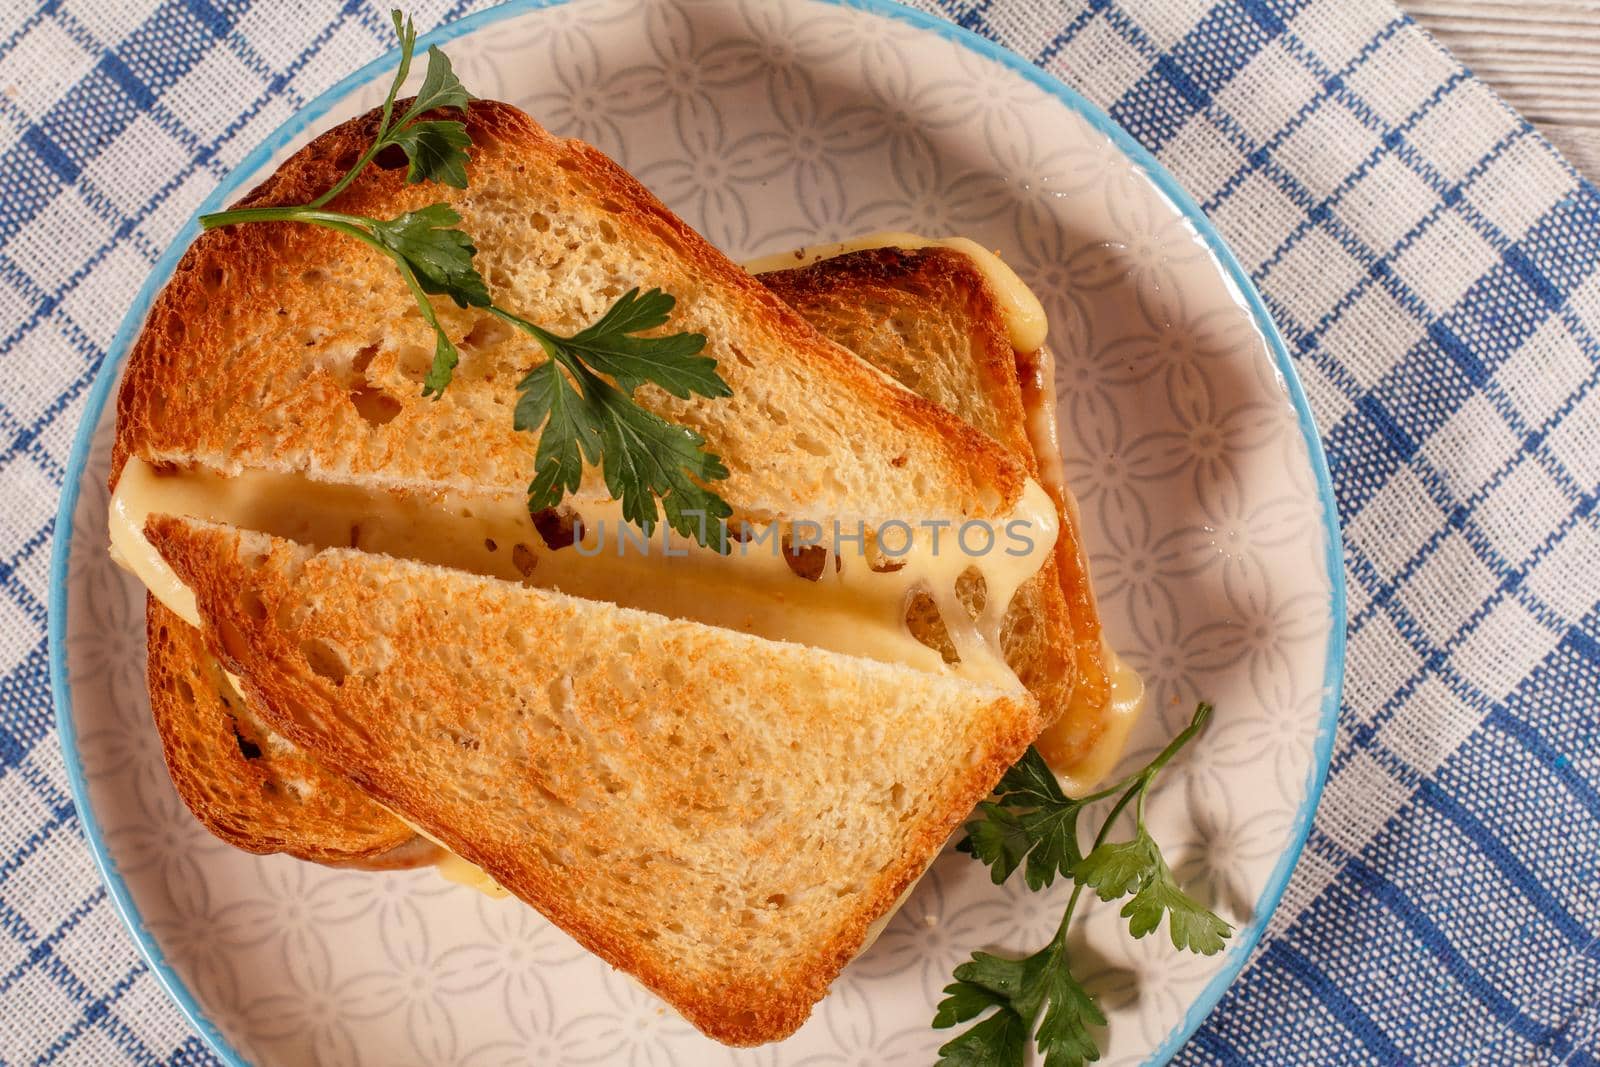 Toasted slices of bread with cheese and green parsley on white plate with blue kitchen napkin. Good food for breakfast. Top view